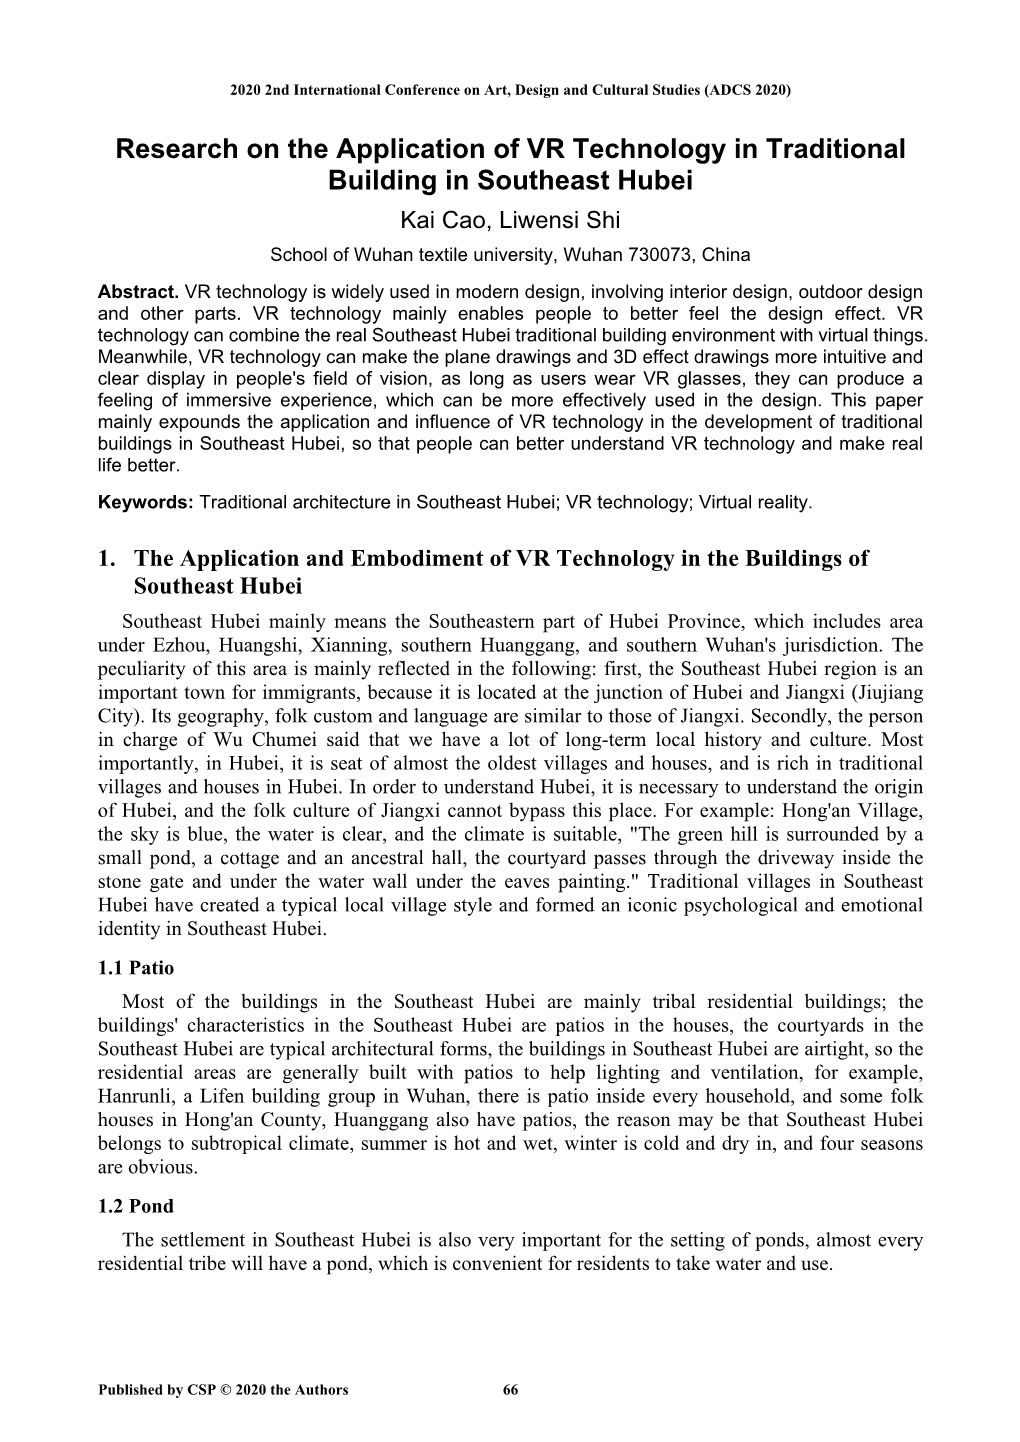 Research on the Application of VR Technology in Traditional Building in Southeast Hubei Kai Cao, Liwensi Shi School of Wuhan Textile University, Wuhan 730073, China